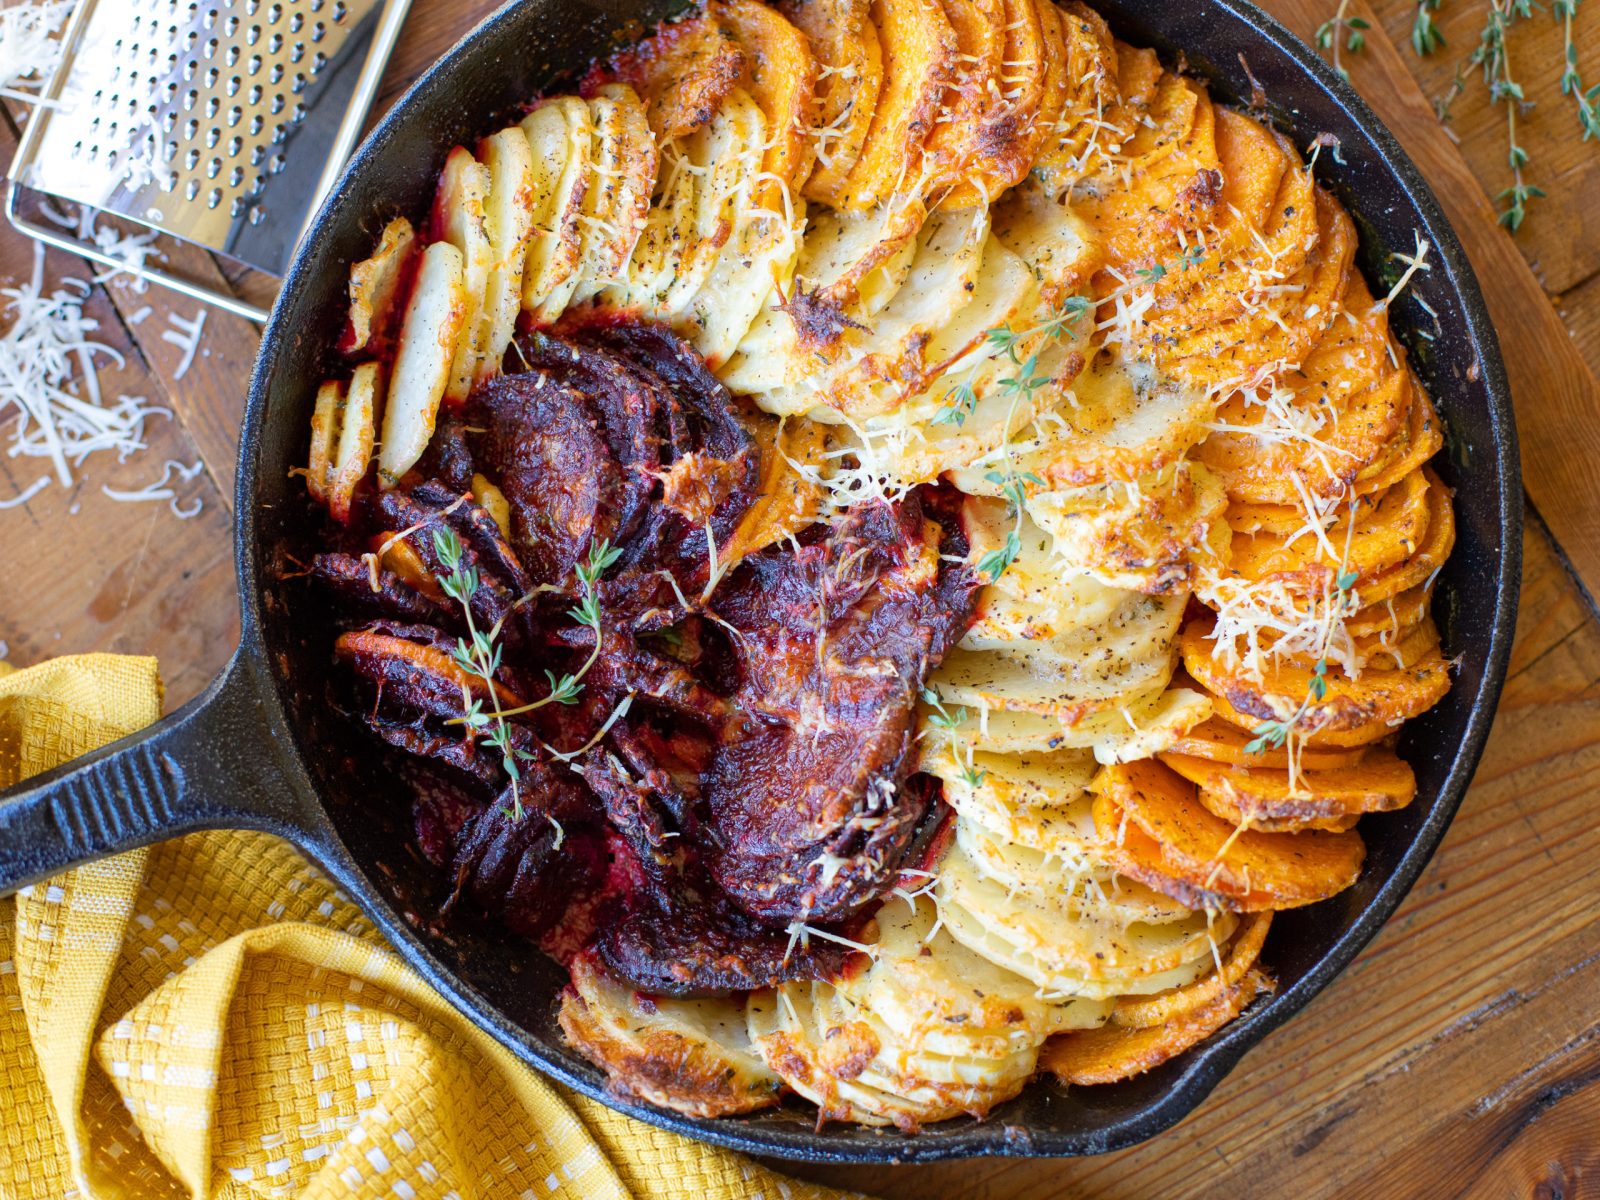 Add This Root Vegetable Gratin To Your Holiday Menu – Grab Everything You Need & Save BIG At Publix